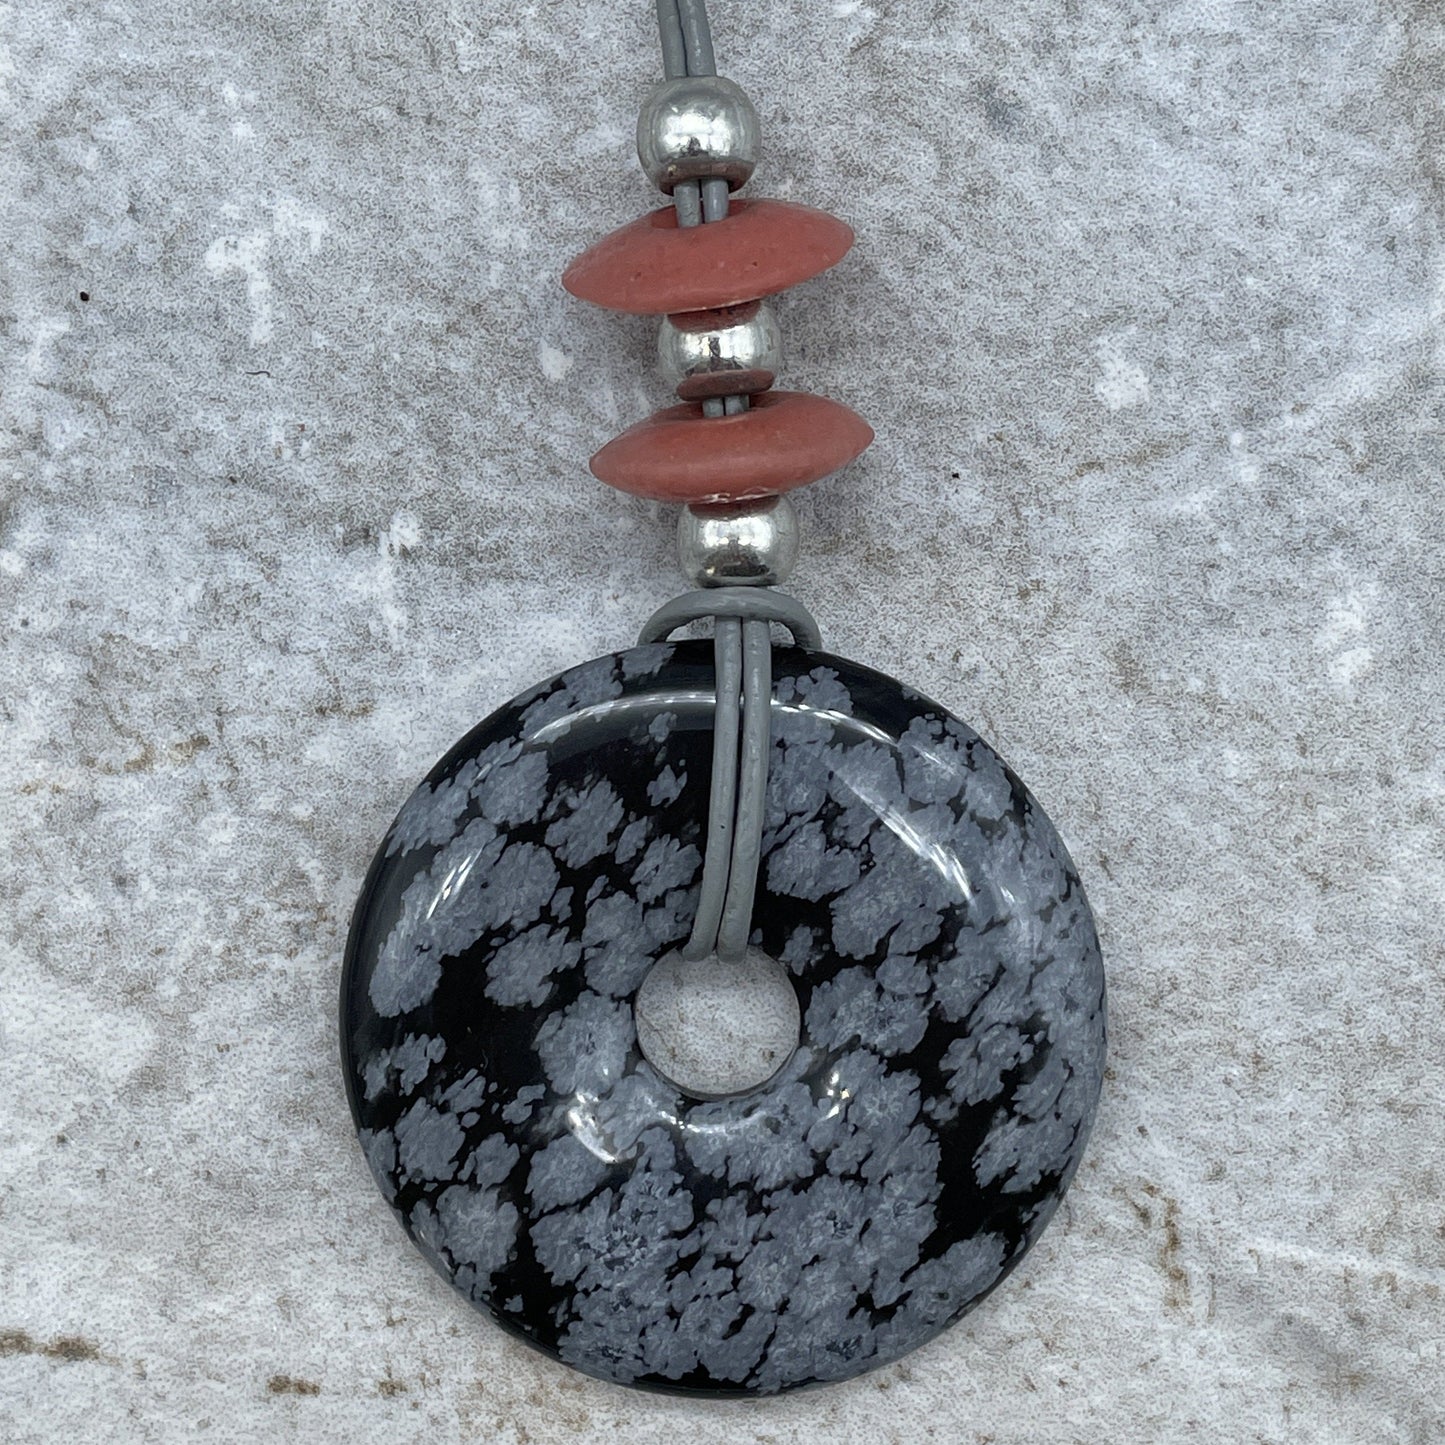 Snowflake Obsidian Pendant on Leather Necklace